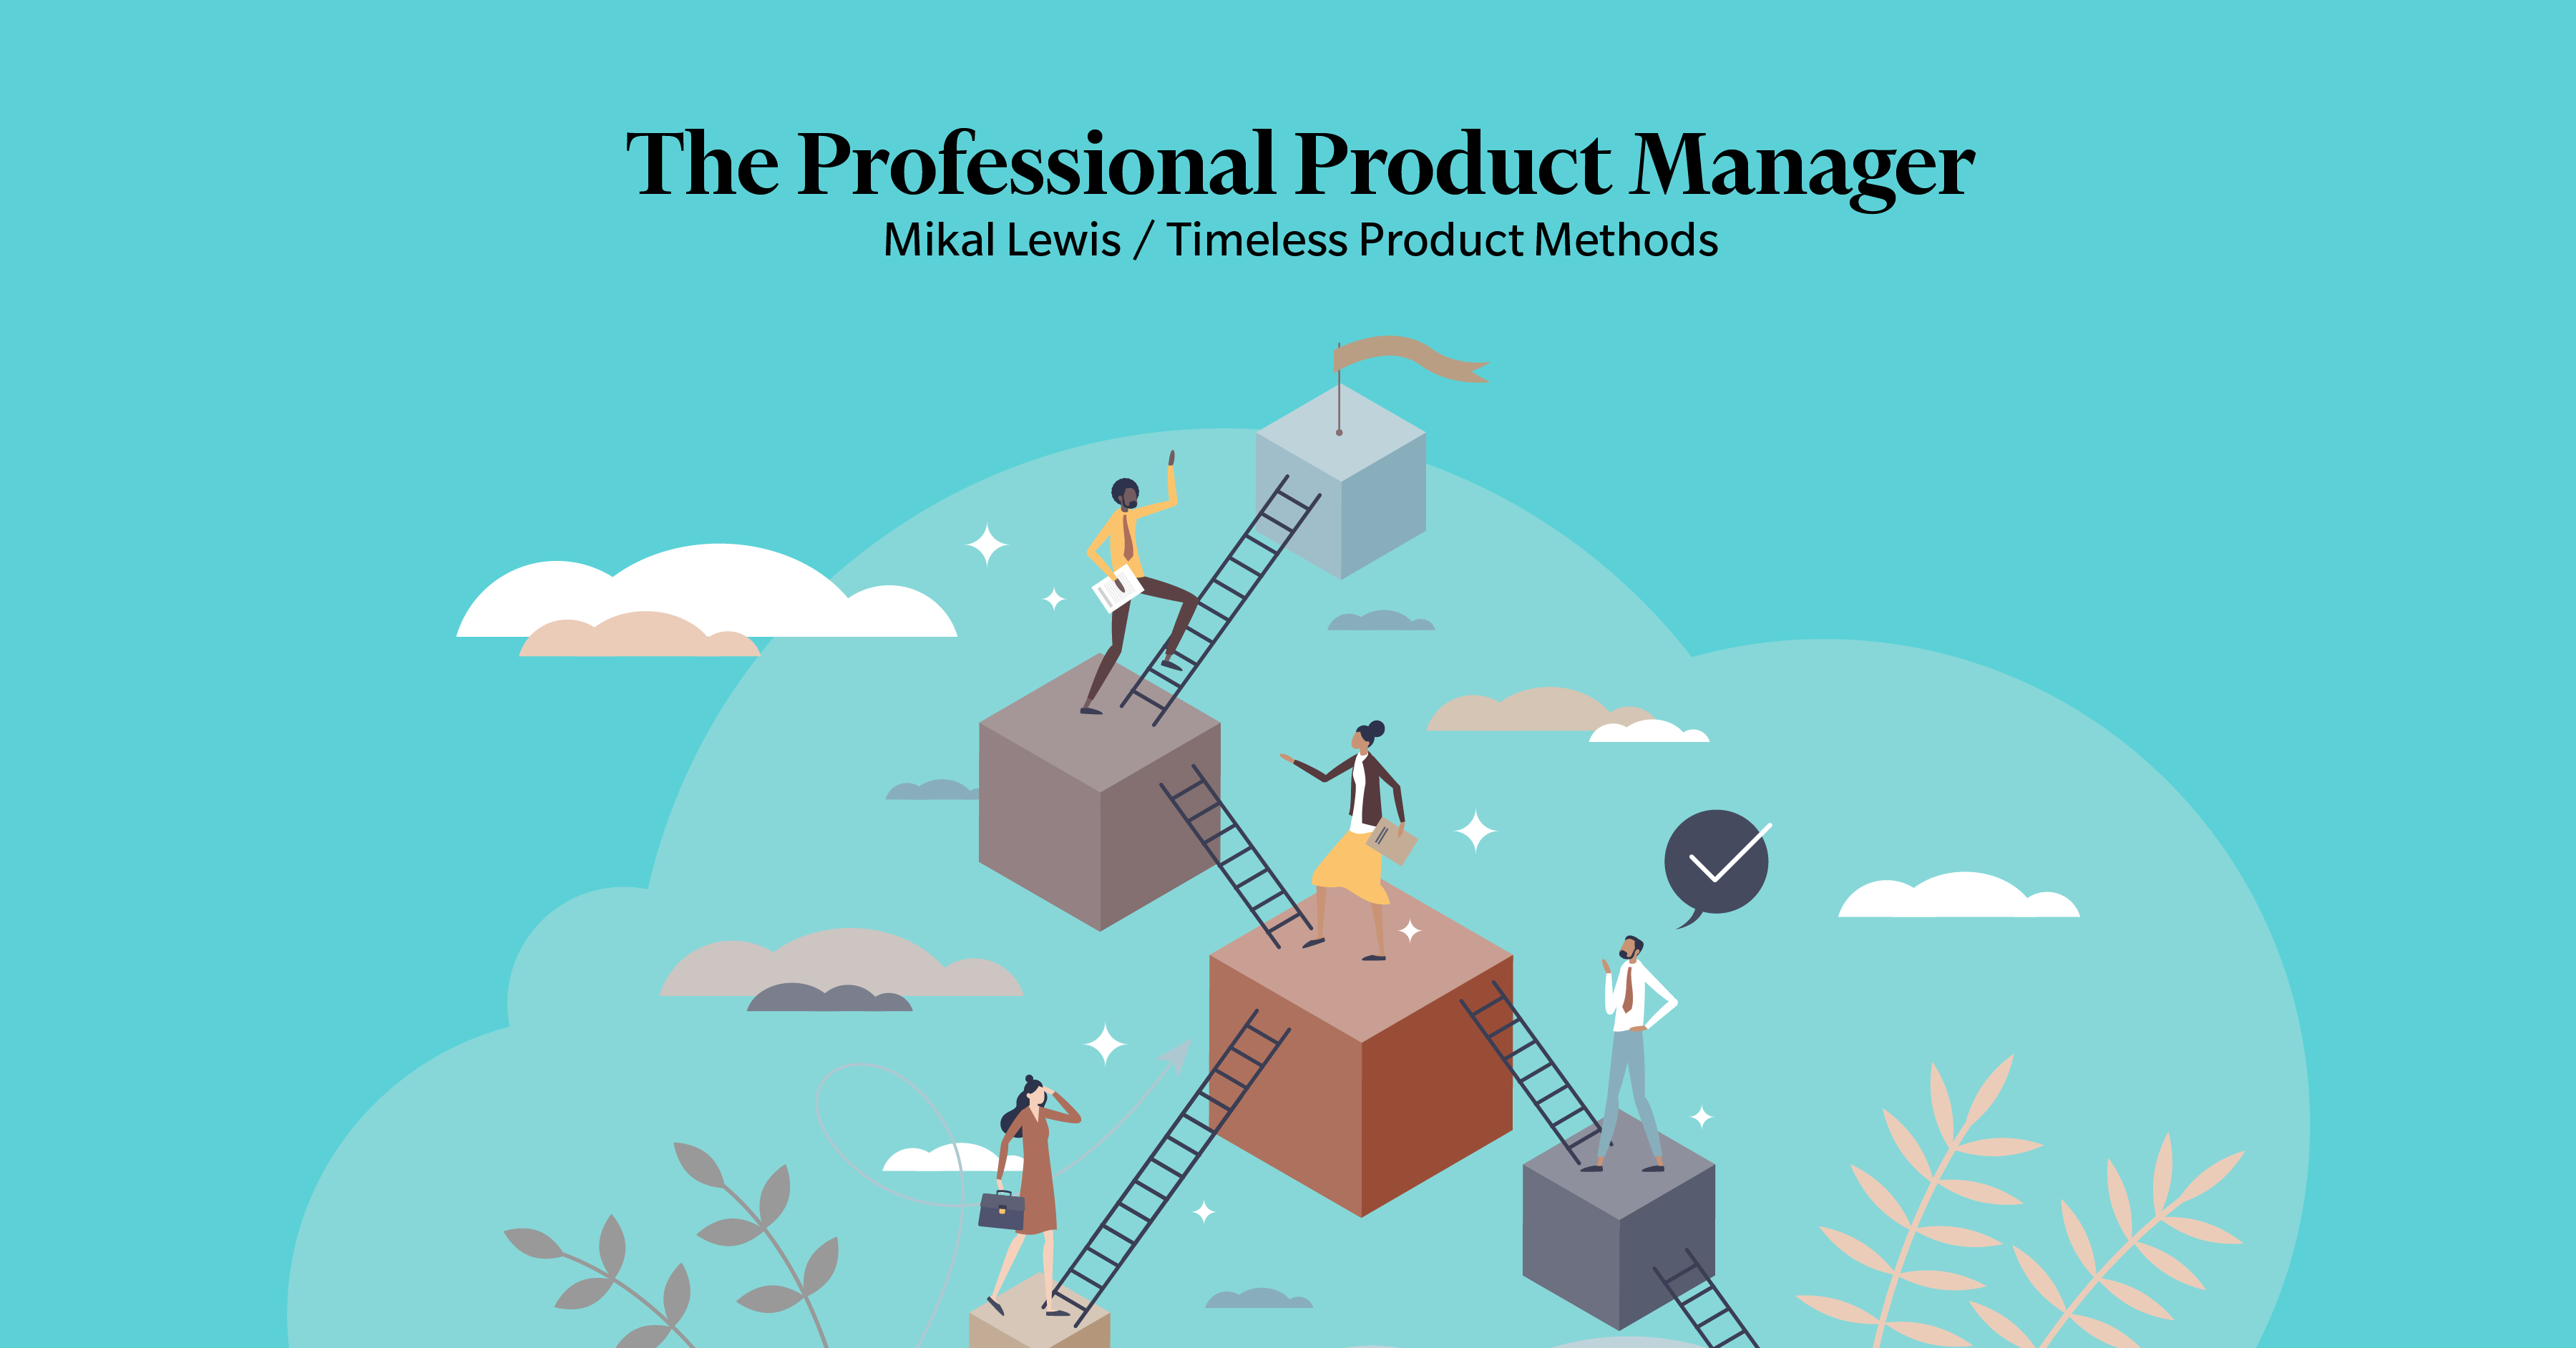 The Professional Product Manager